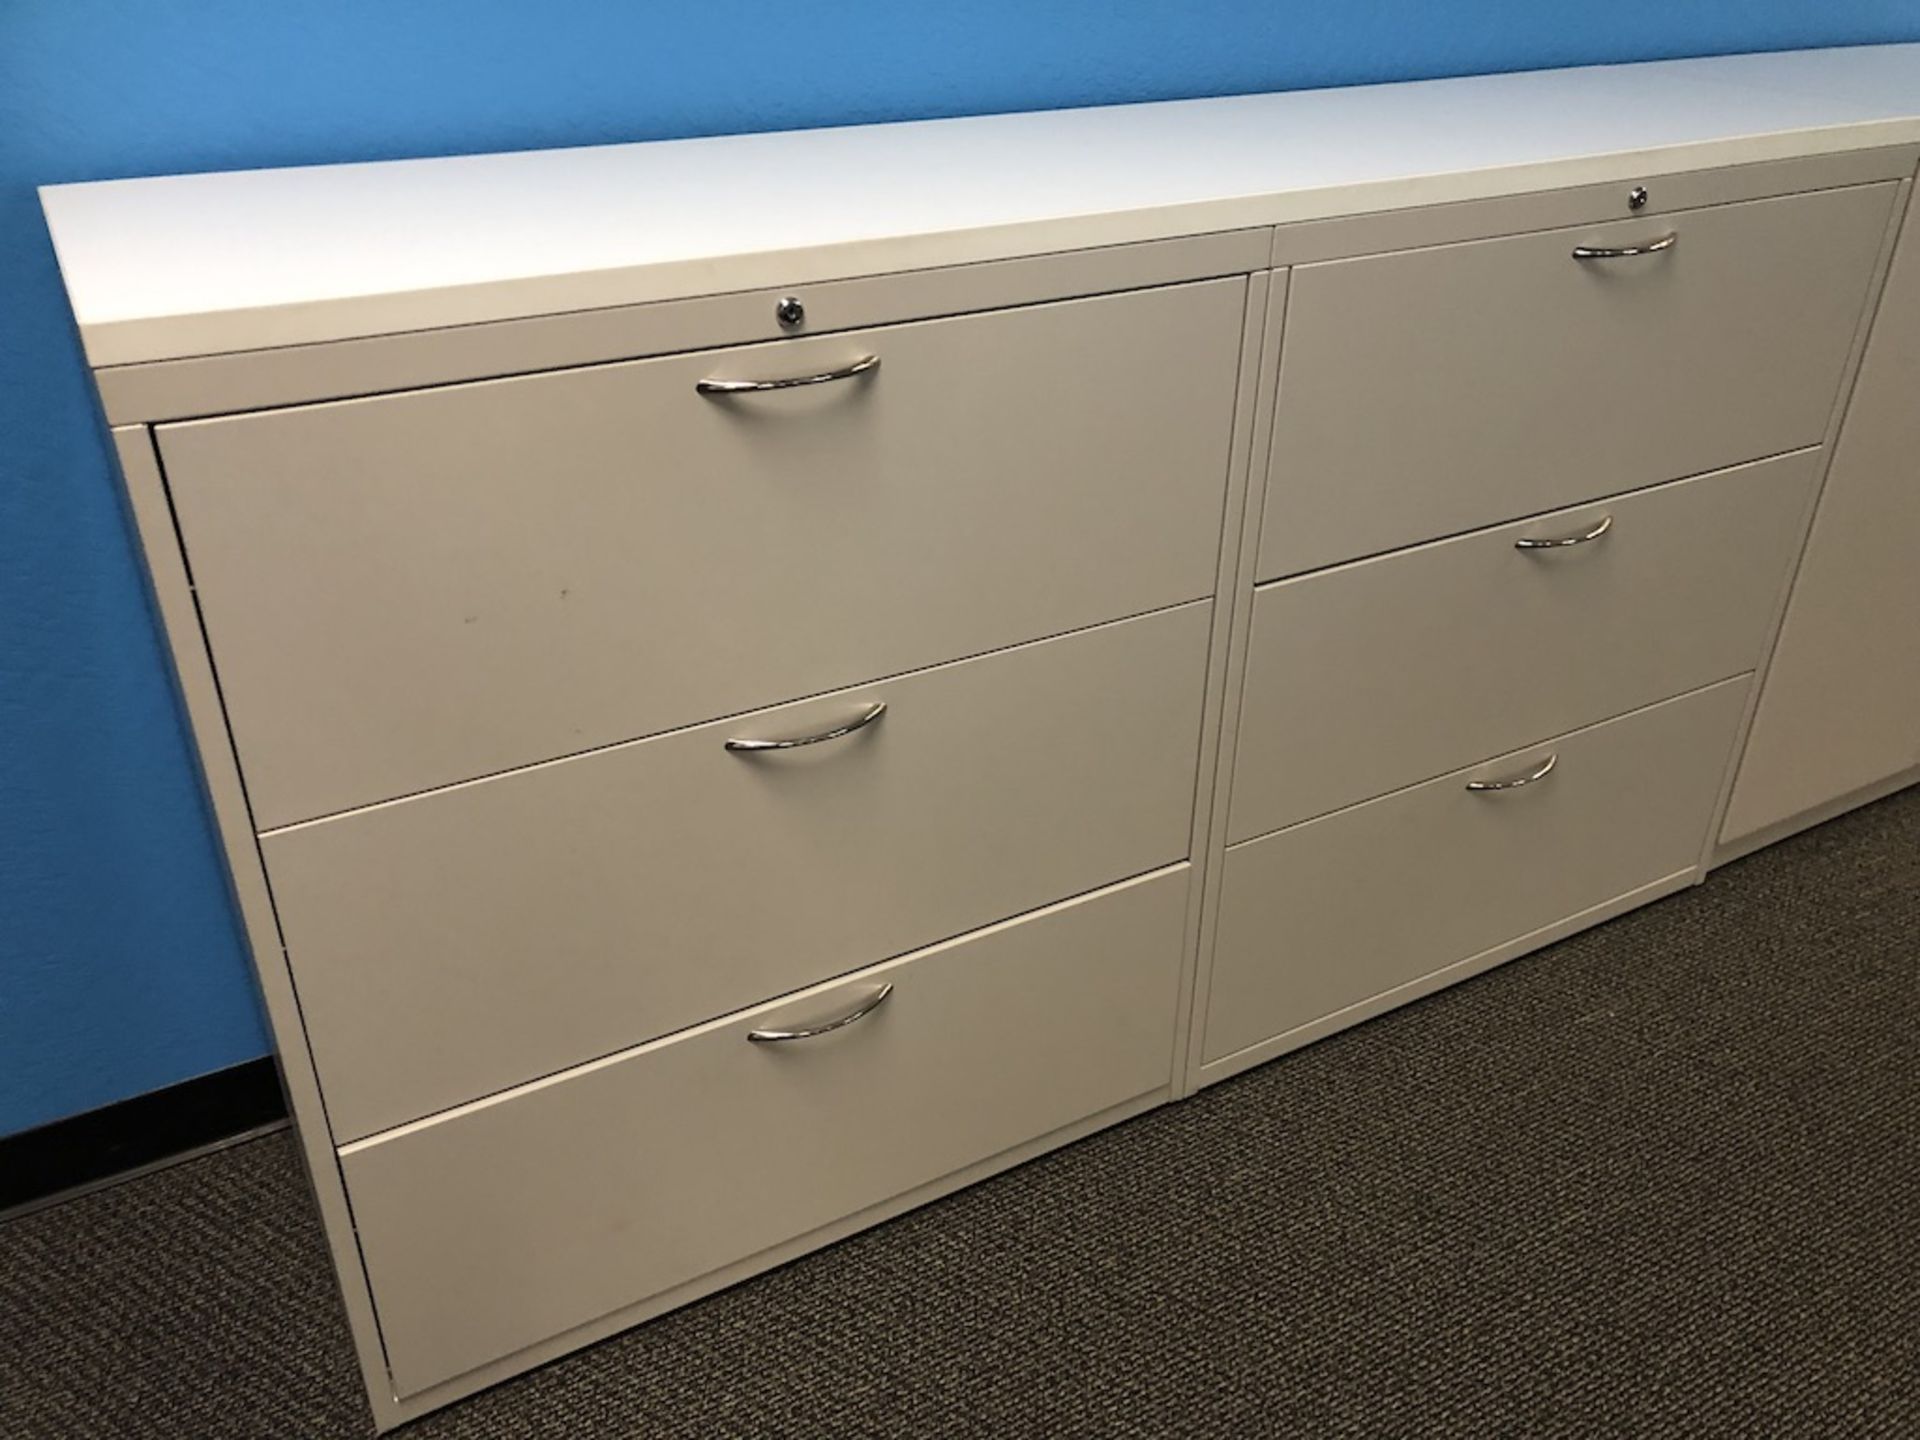 6 DRAWER OFFICE CABINET 6FT L X 18IN W X 41IN H   SCHNEIDER ELECTRIC- 6611 PRESTON AVE SUITE A - Image 4 of 5